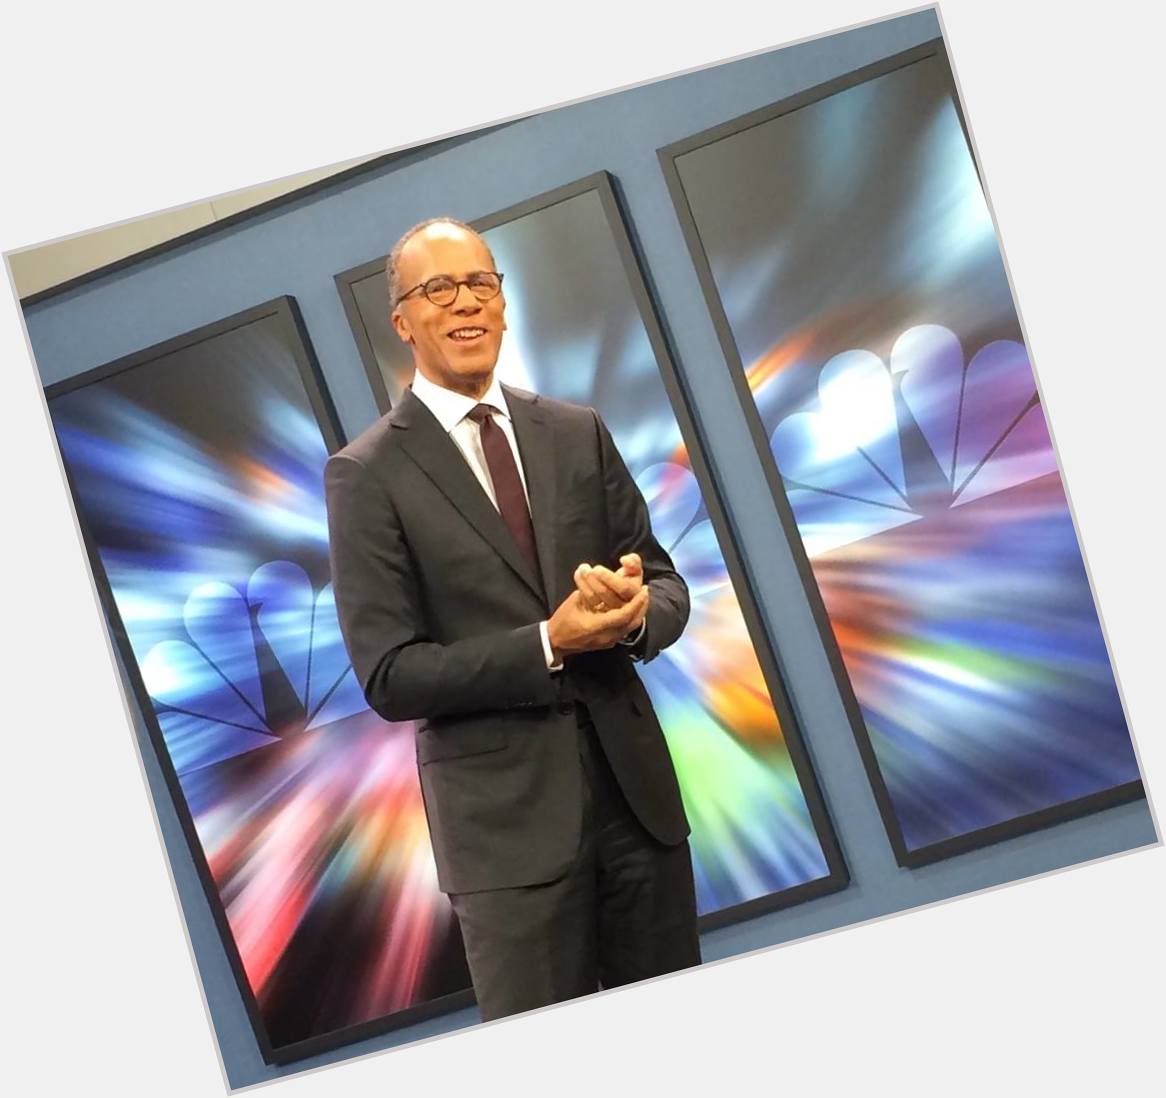 Happy Birthday to our buddy, NBC Nightly News anchor Lester Holt, who turns 58 years old today. 